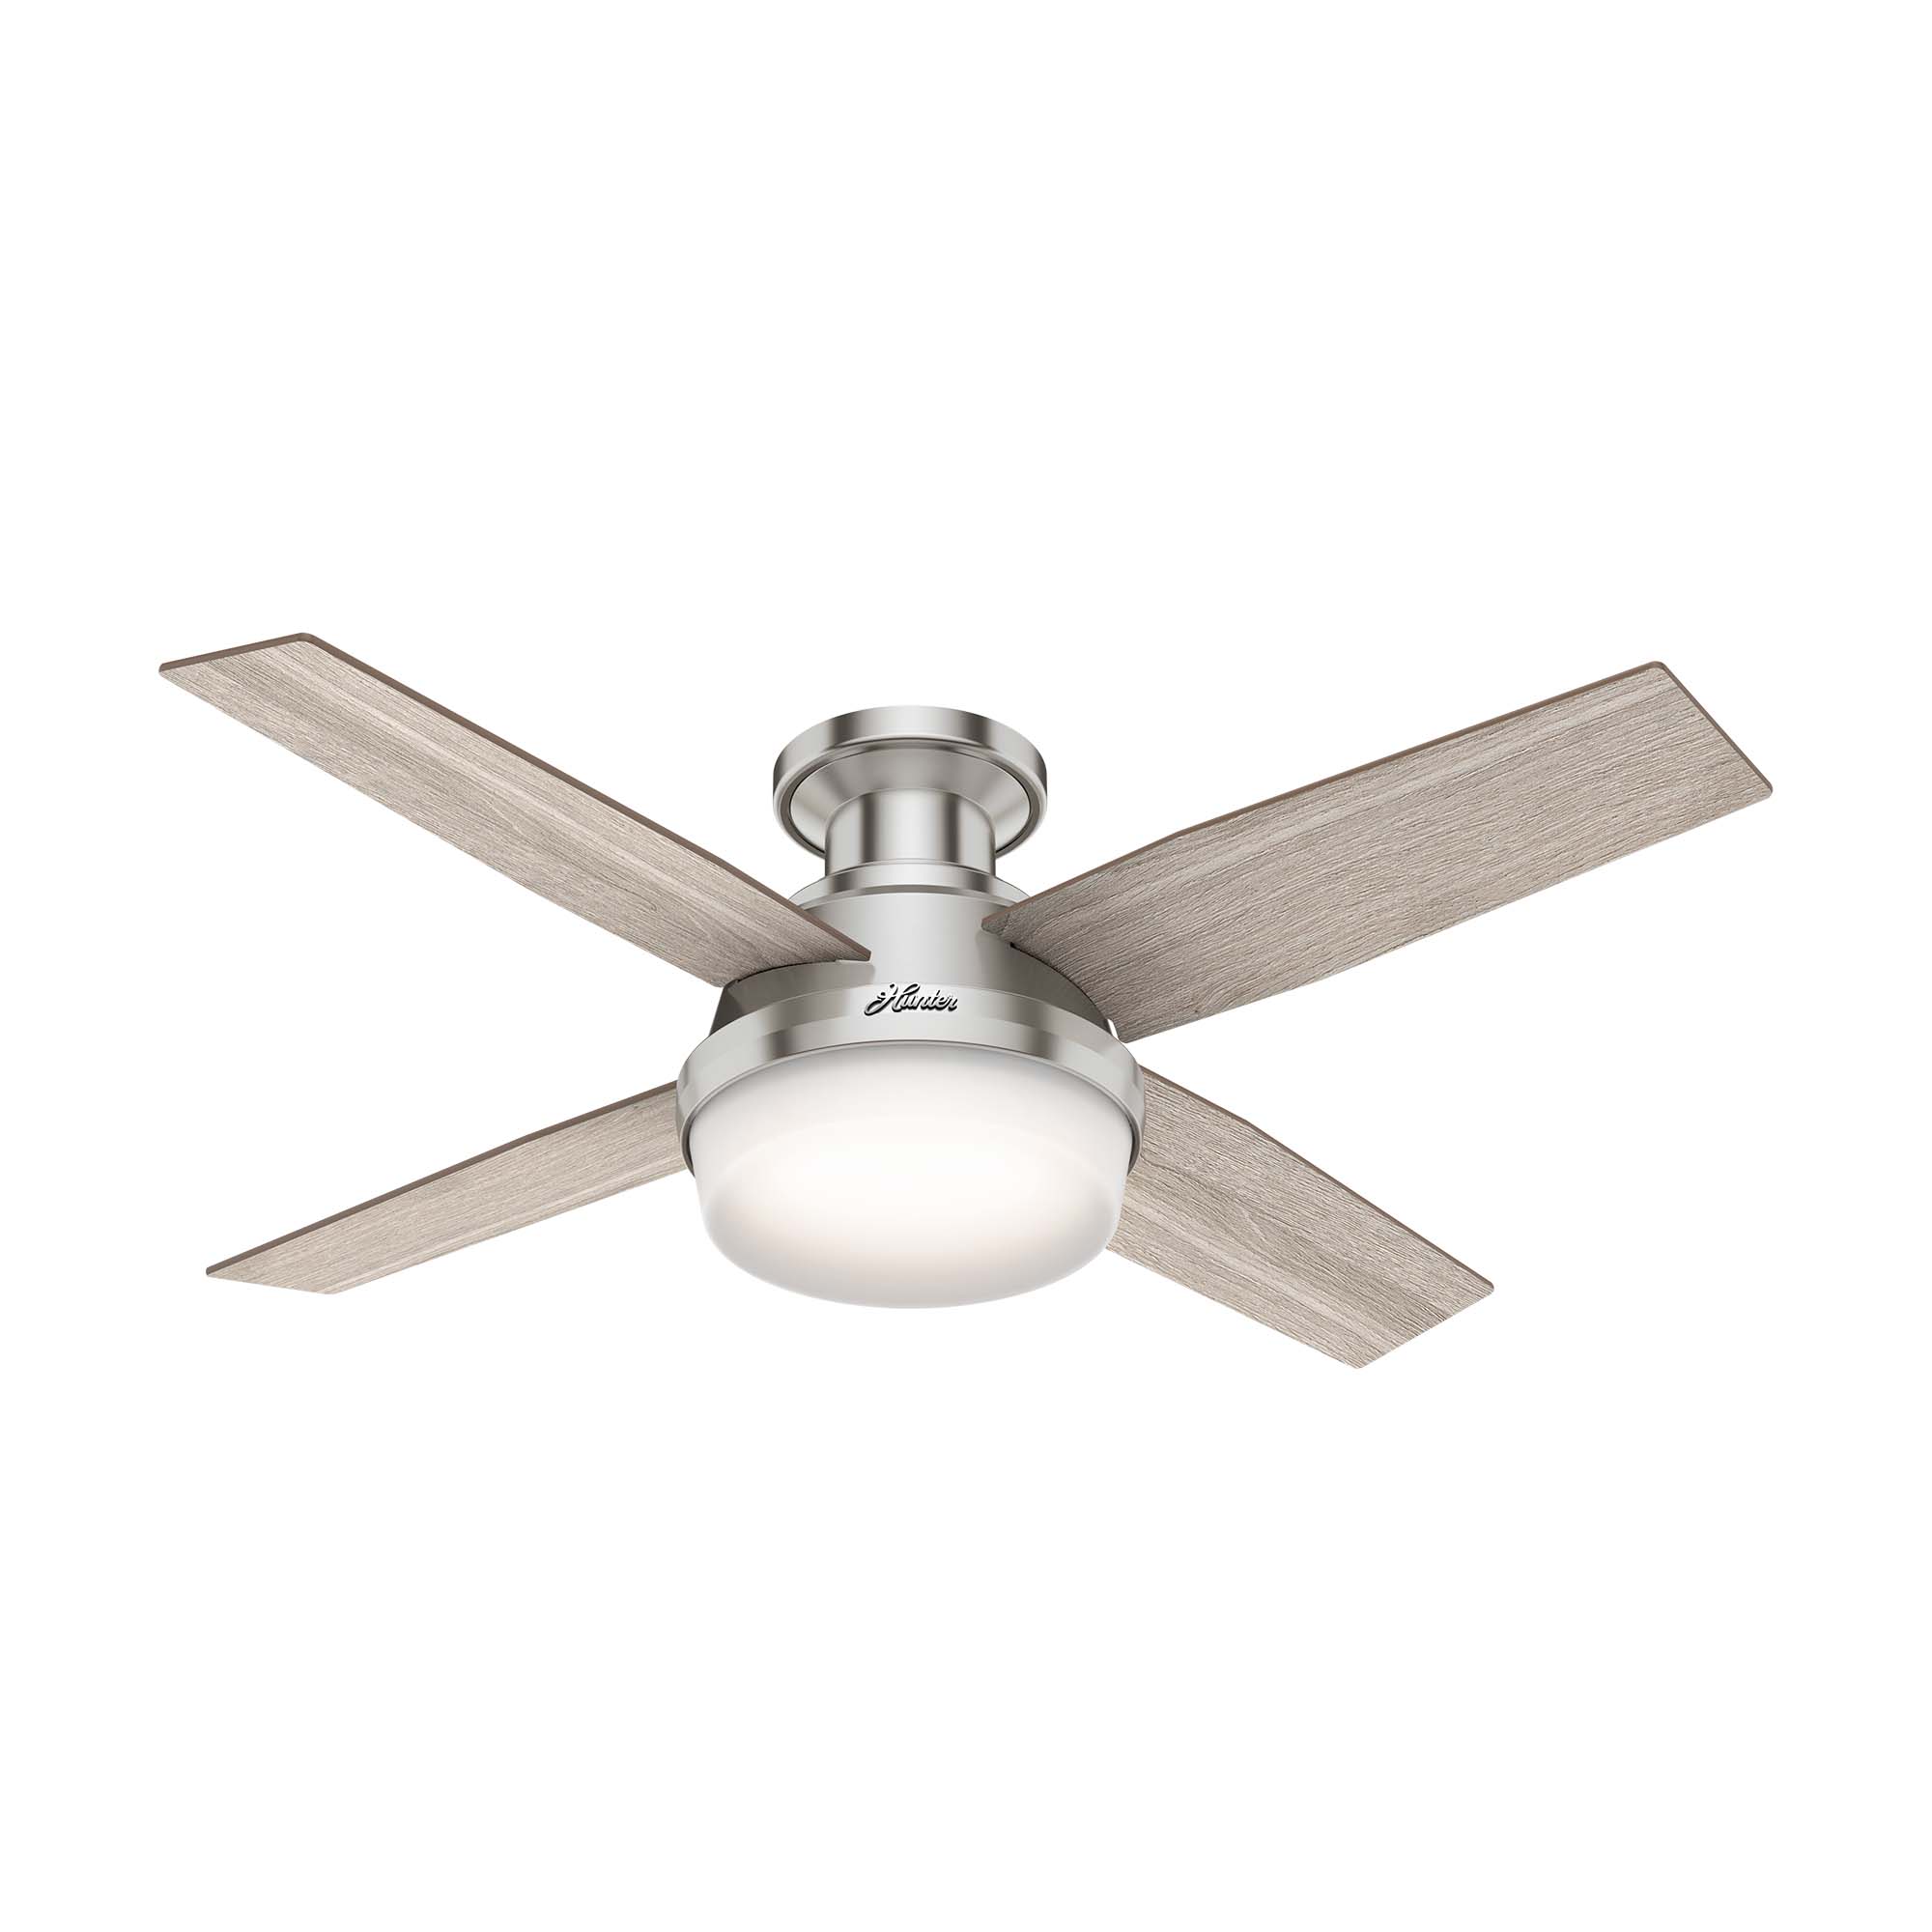 Hunter 44 inch Dempsey Low Profile Ceiling Fan with LED Light Kit and Handheld Remote Ceiling Fan Hunter   